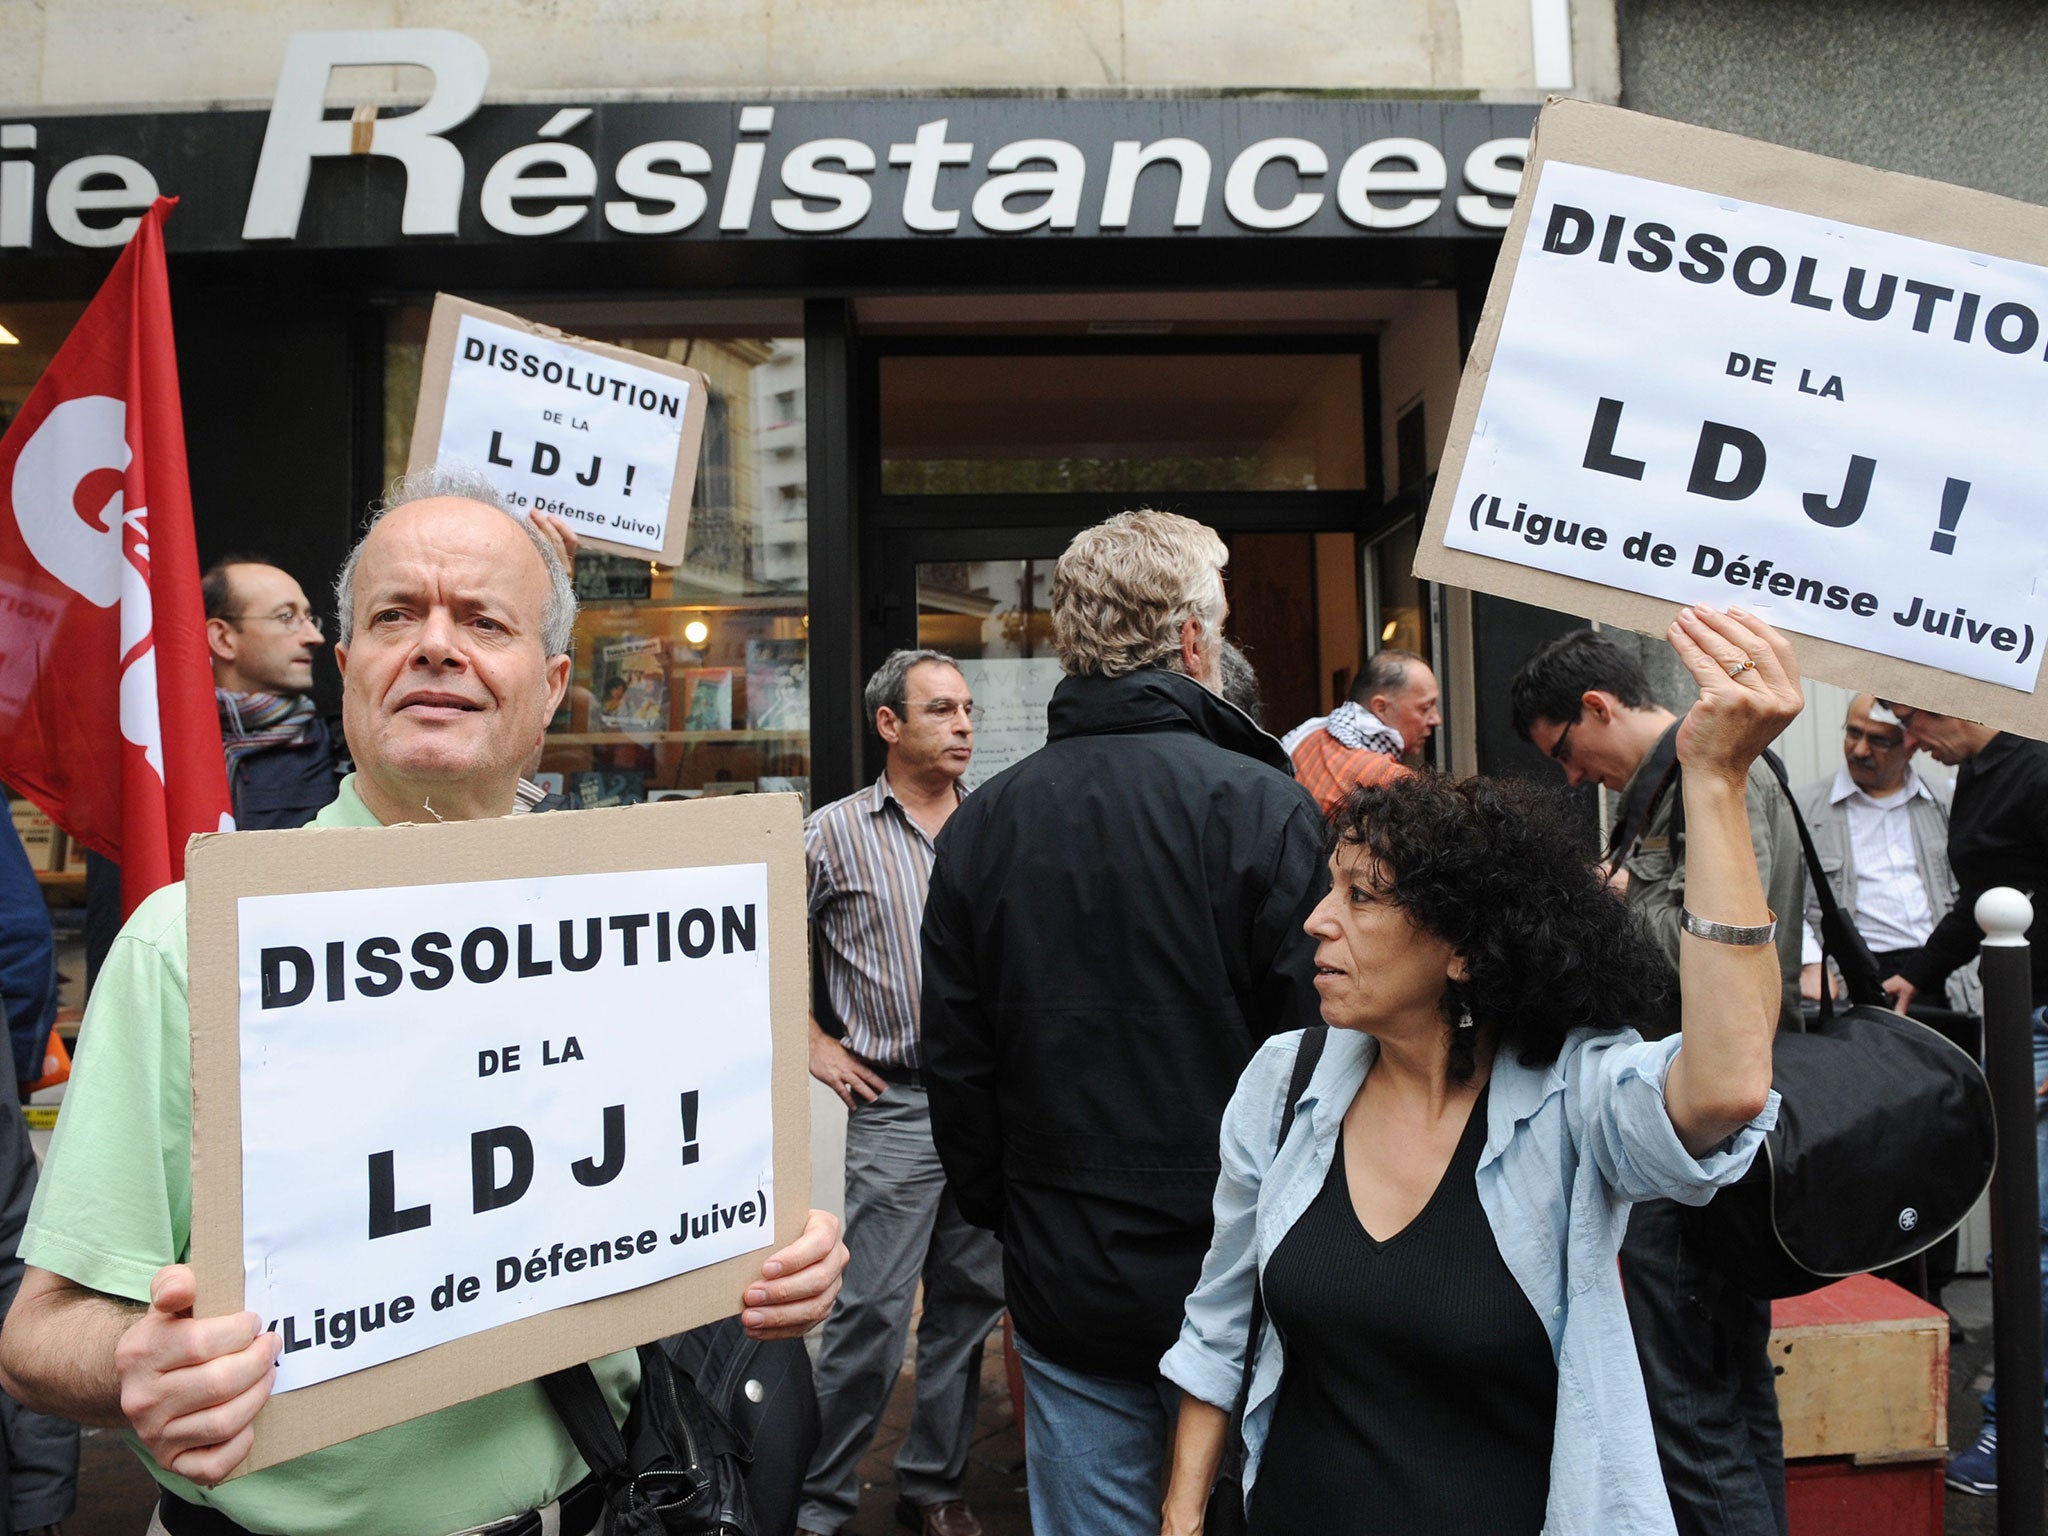 People hold signs reading "Dissolution of the LDJ!" during a demonstration calling for the ban of the Jewish Defense League (Ligue de Defense Juive)